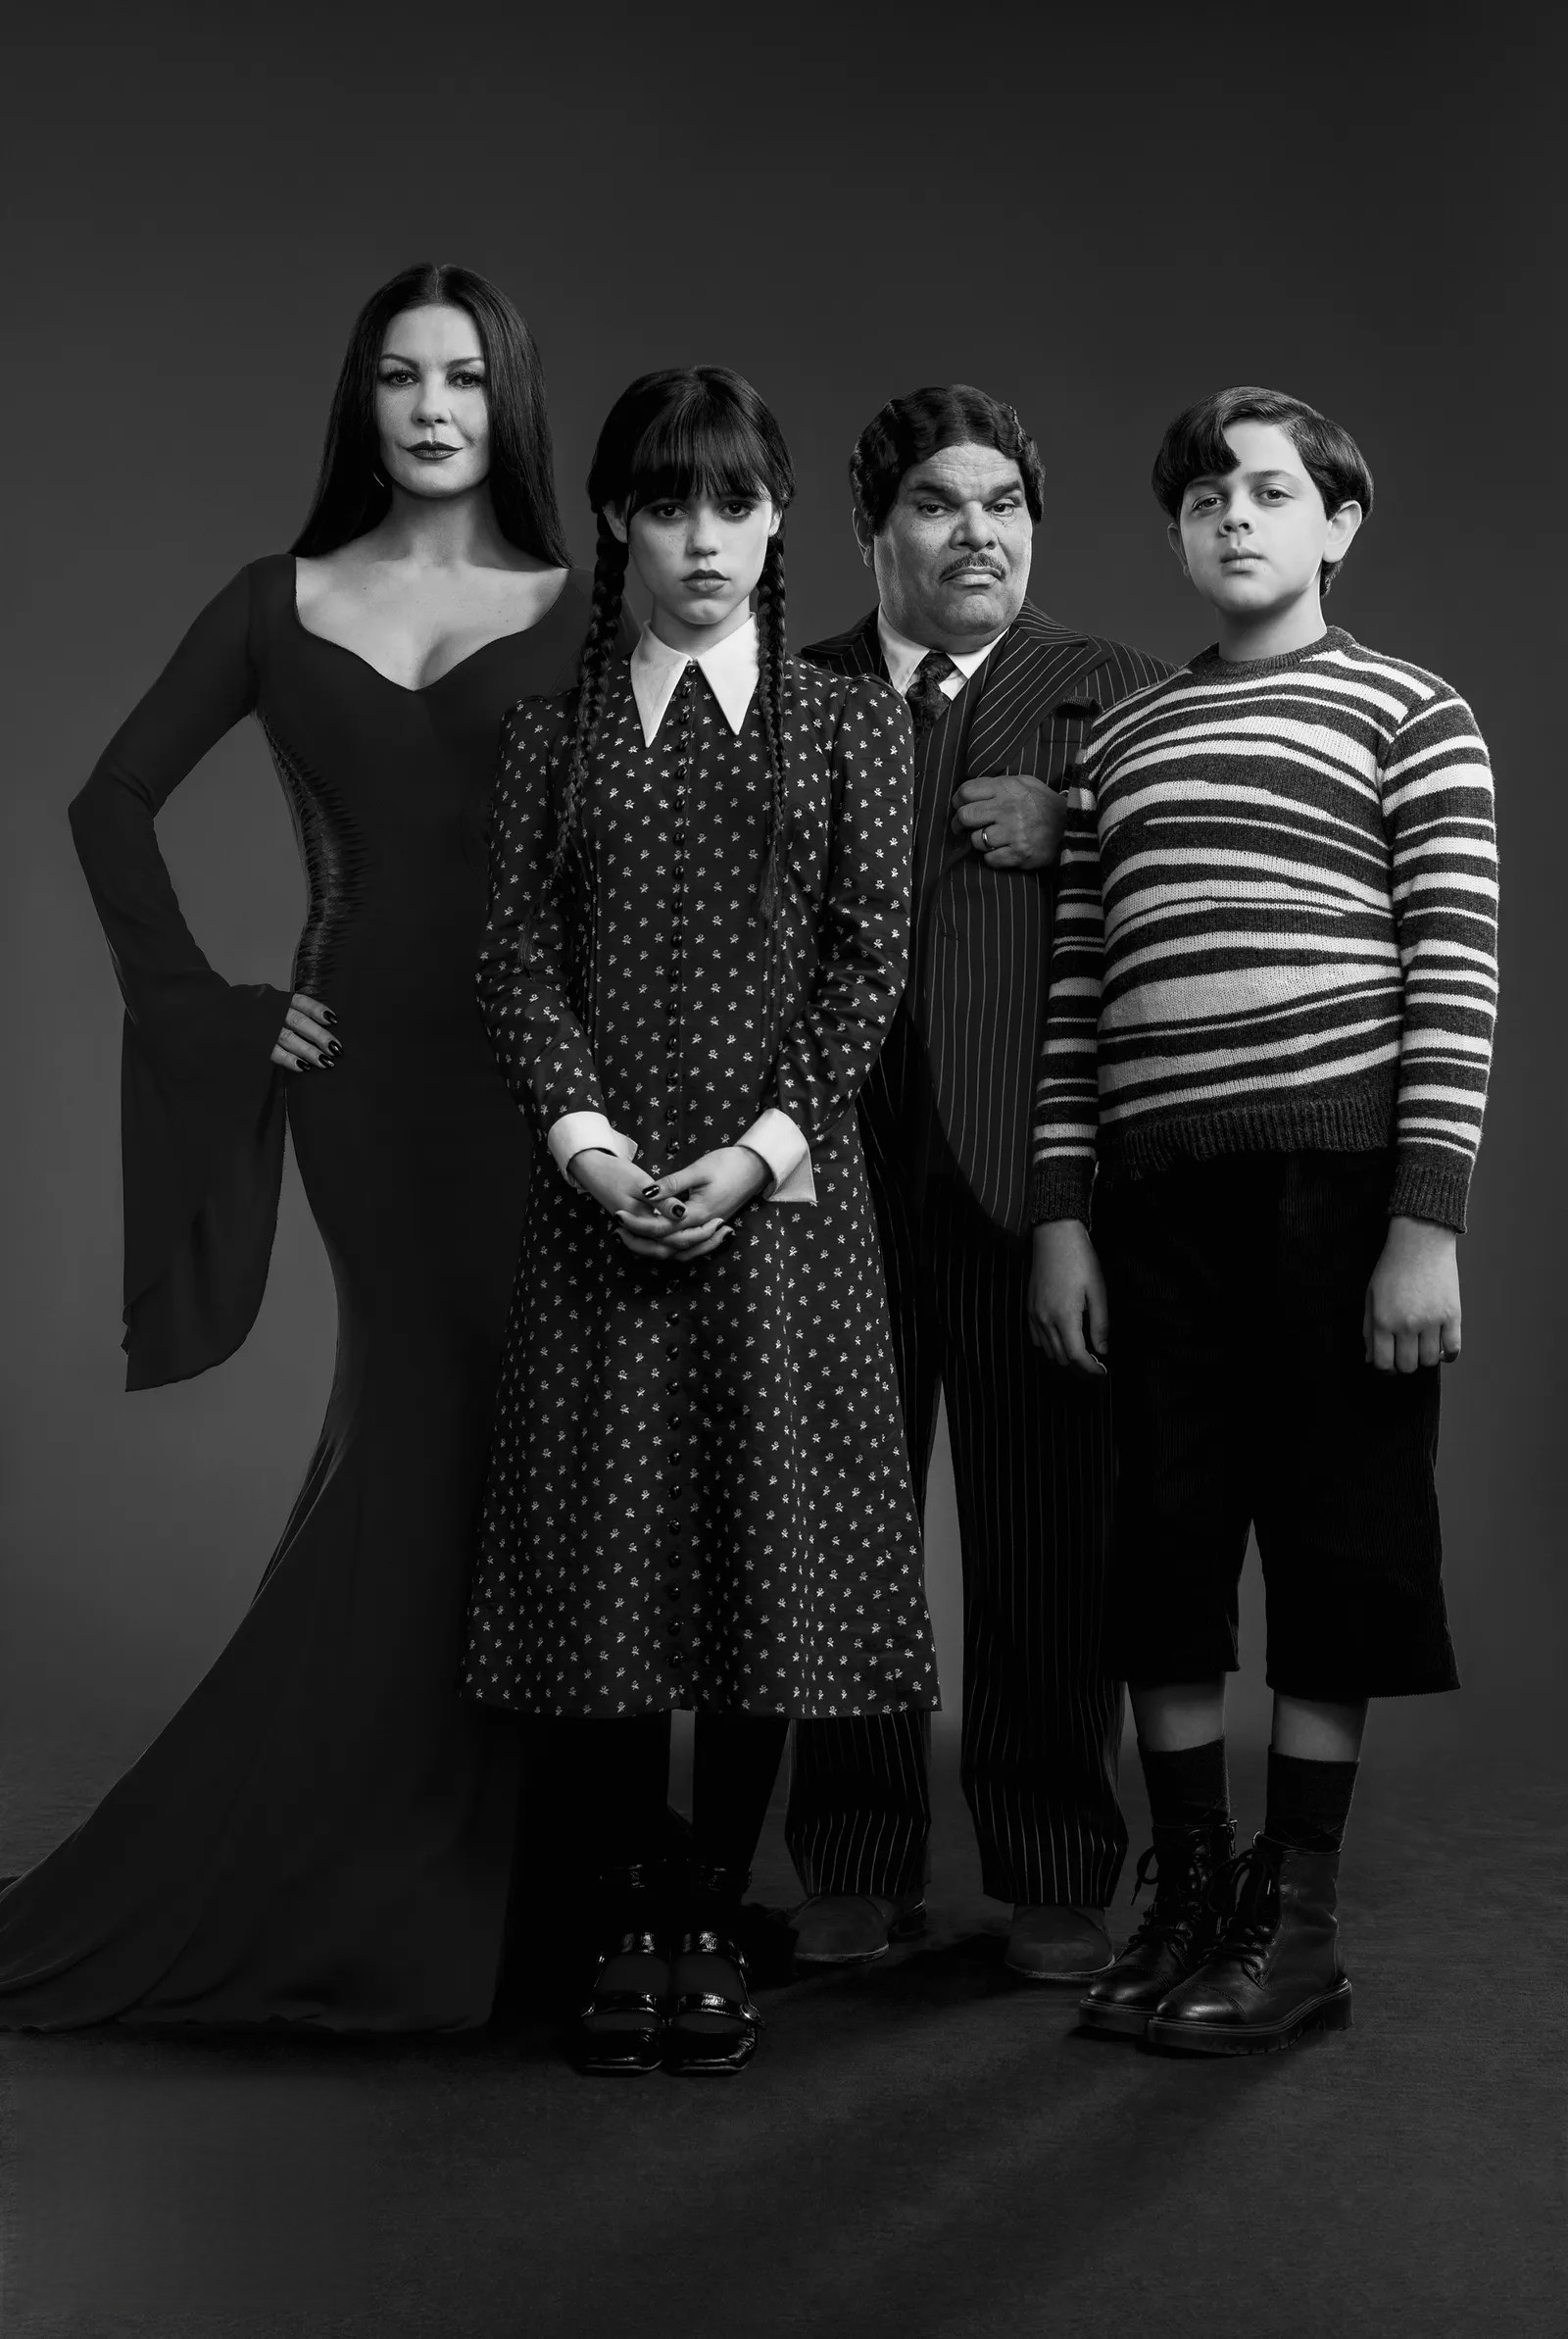 The Addams Family portrait from the Netflix's series Wednesday